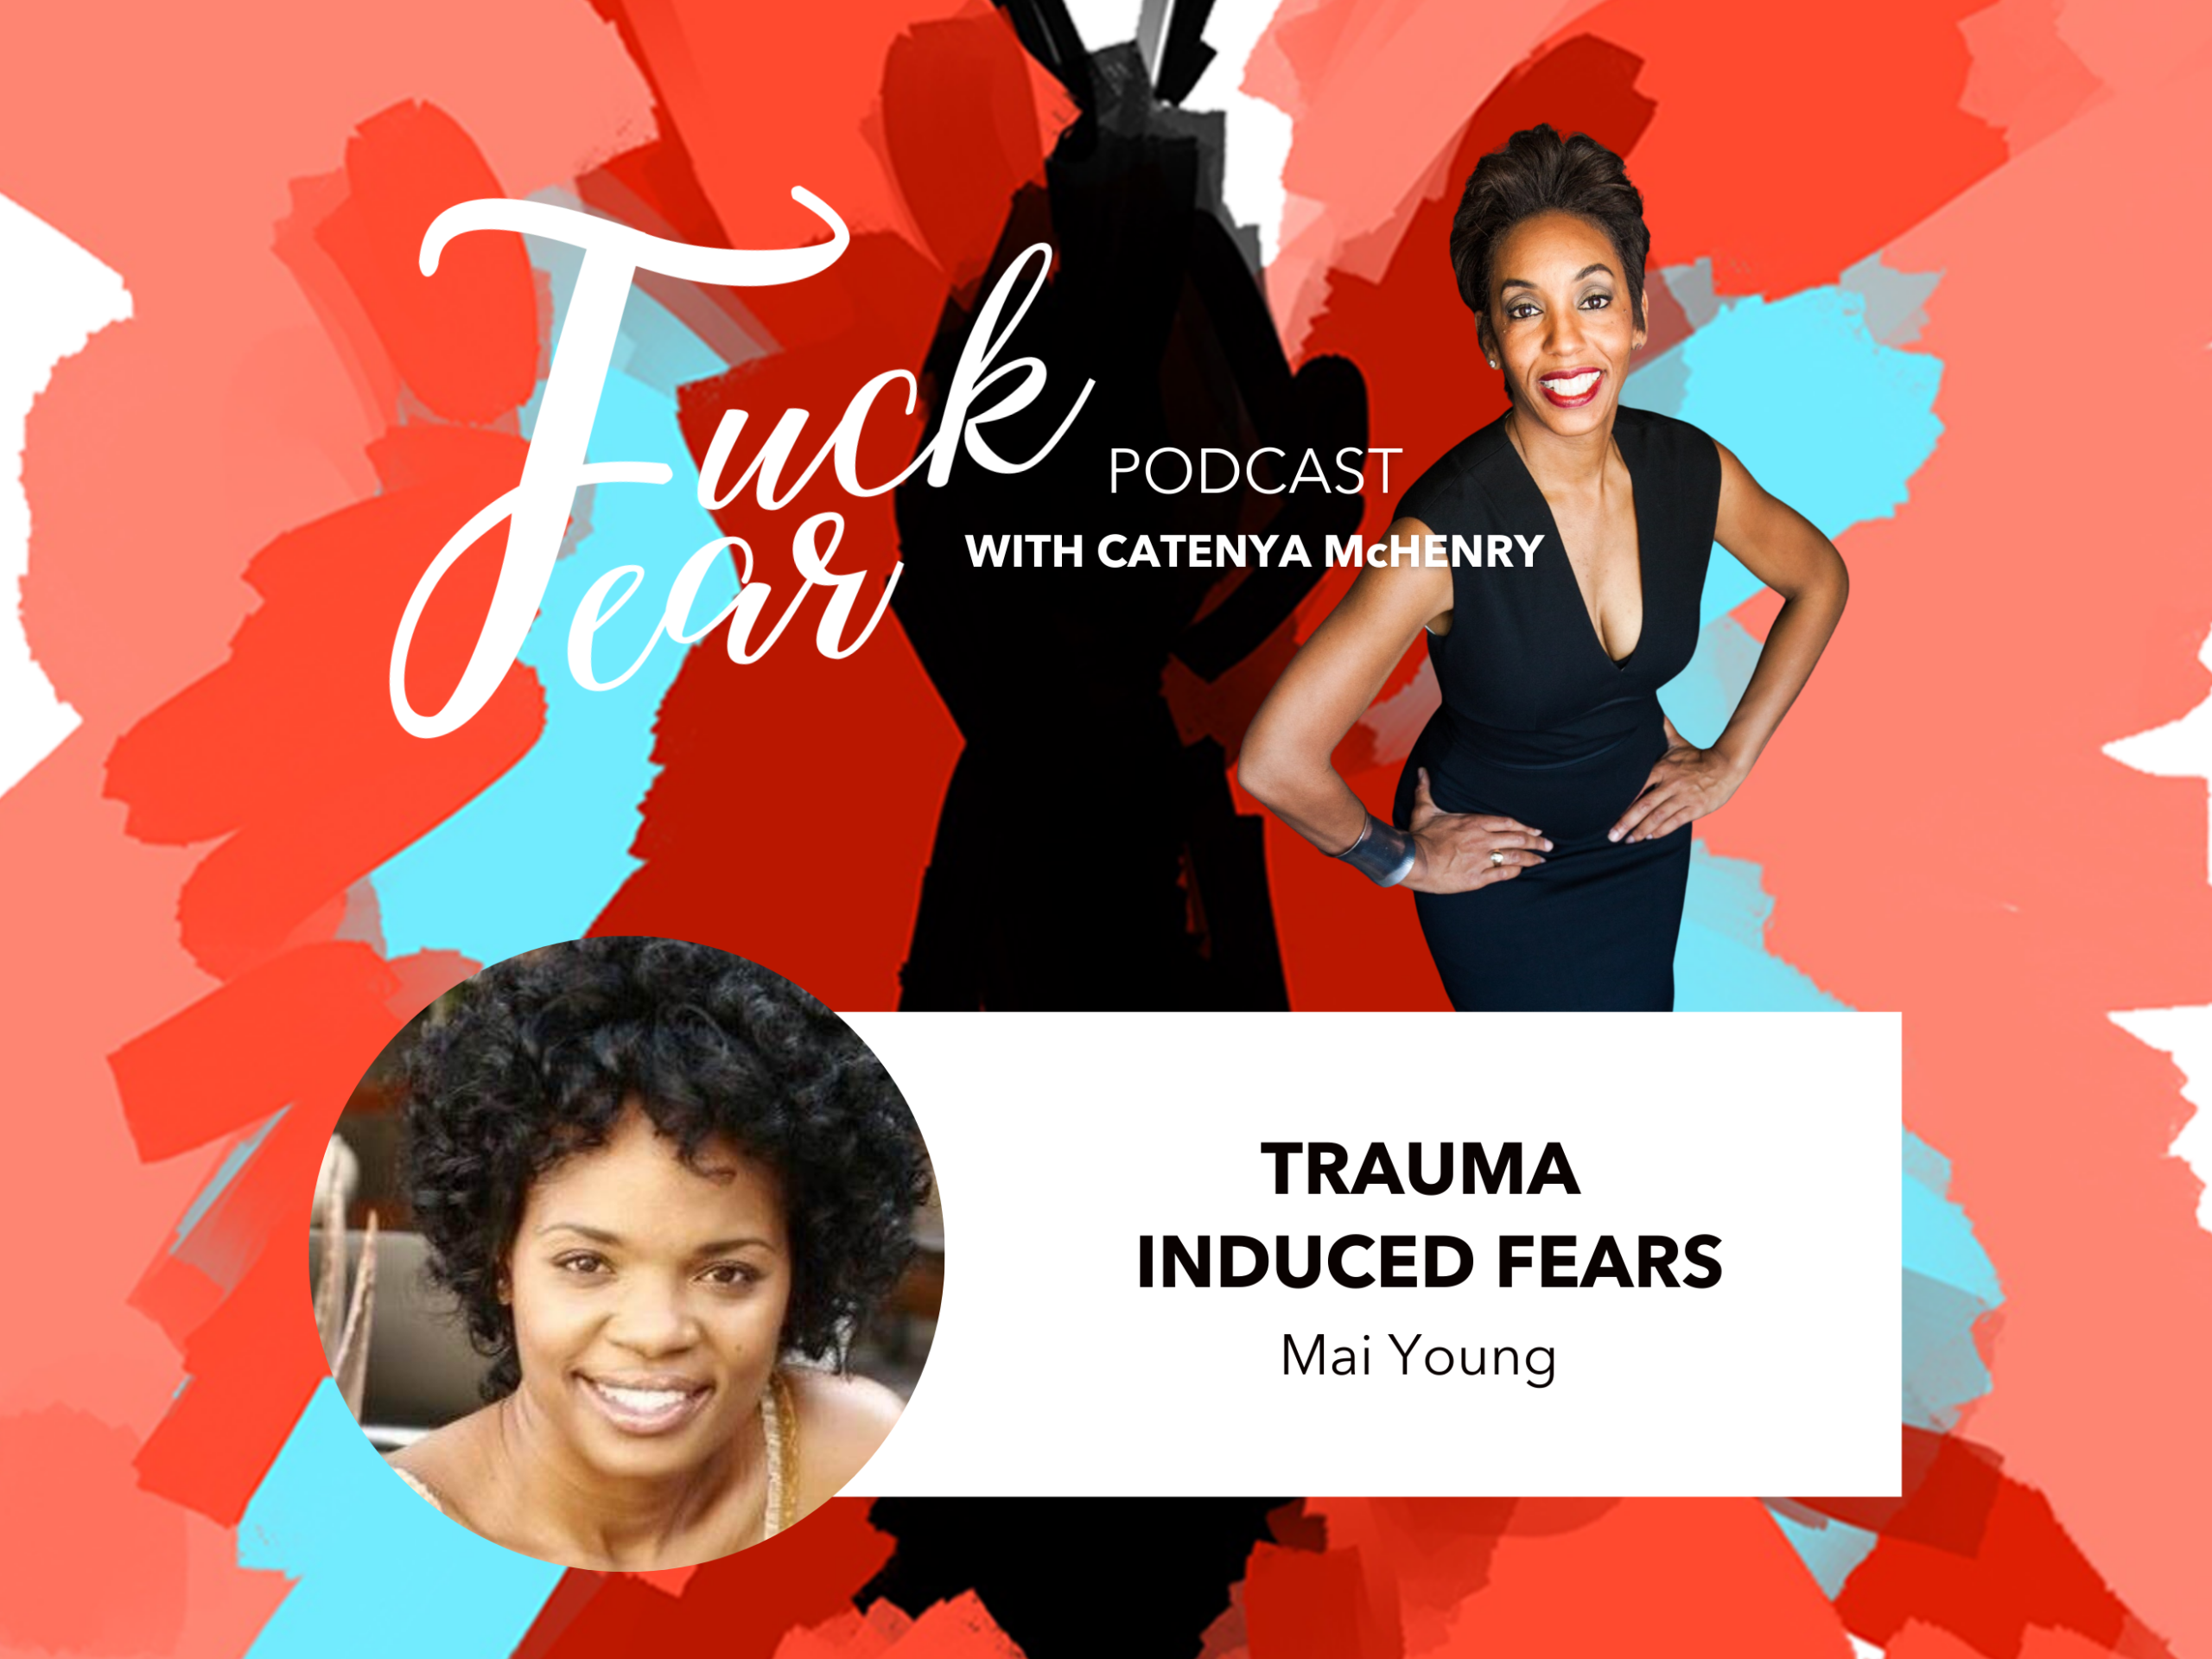 Trauma Induced Fears with Mai Young on the Fuck Fear podcast with host Catenya McHenry